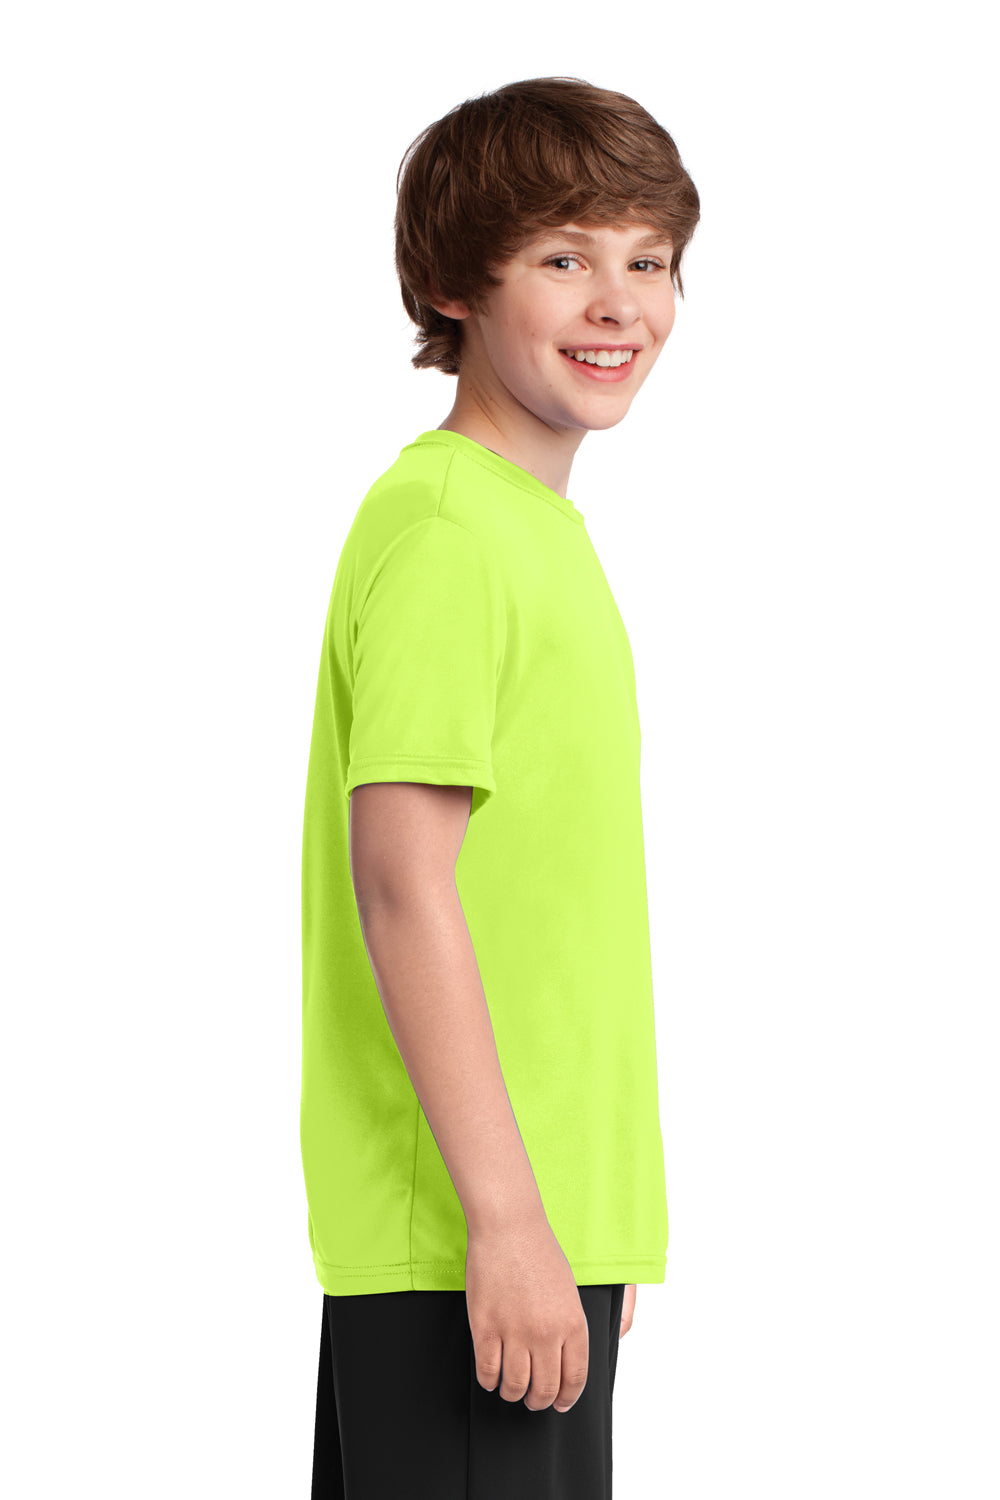 Port & Company PC380Y Youth Dry Zone Performance Moisture Wicking Short Sleeve Crewneck T-Shirt Neon Yellow Side